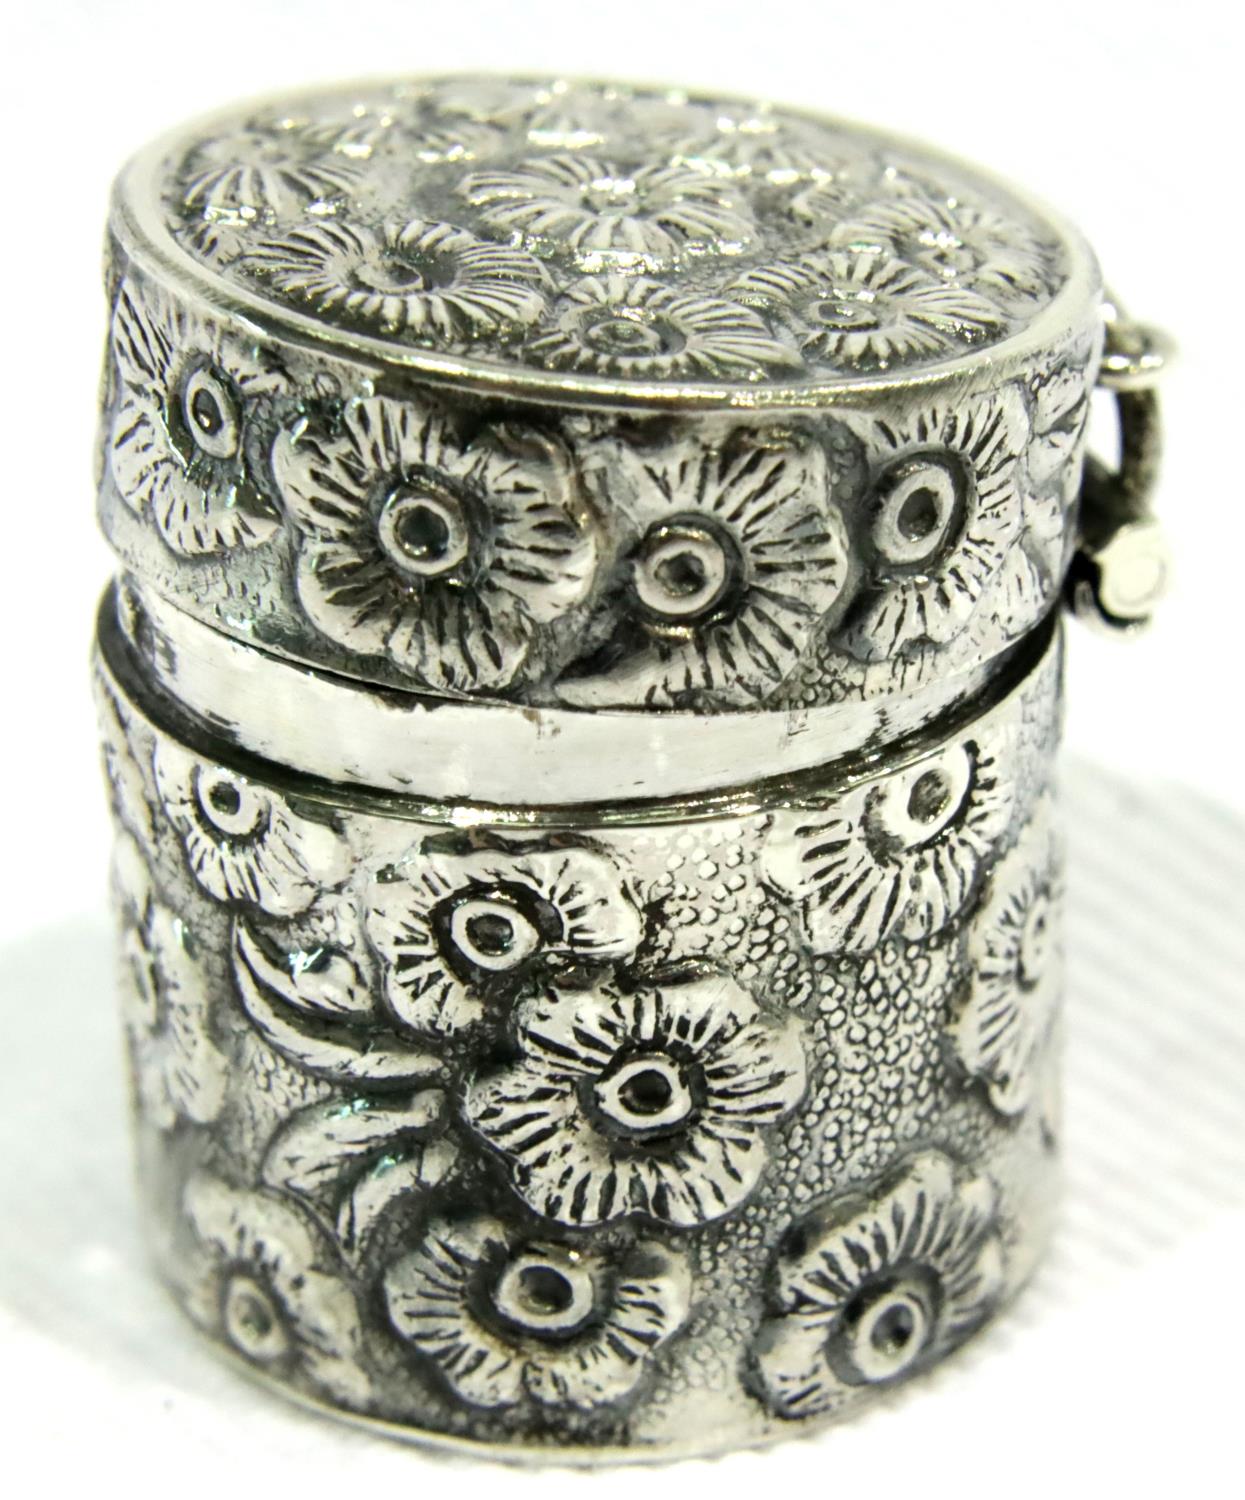 925 silver thimble case with floral decoration, L: 25 mm, 15g. P&P Group 1 (£14+VAT for the first